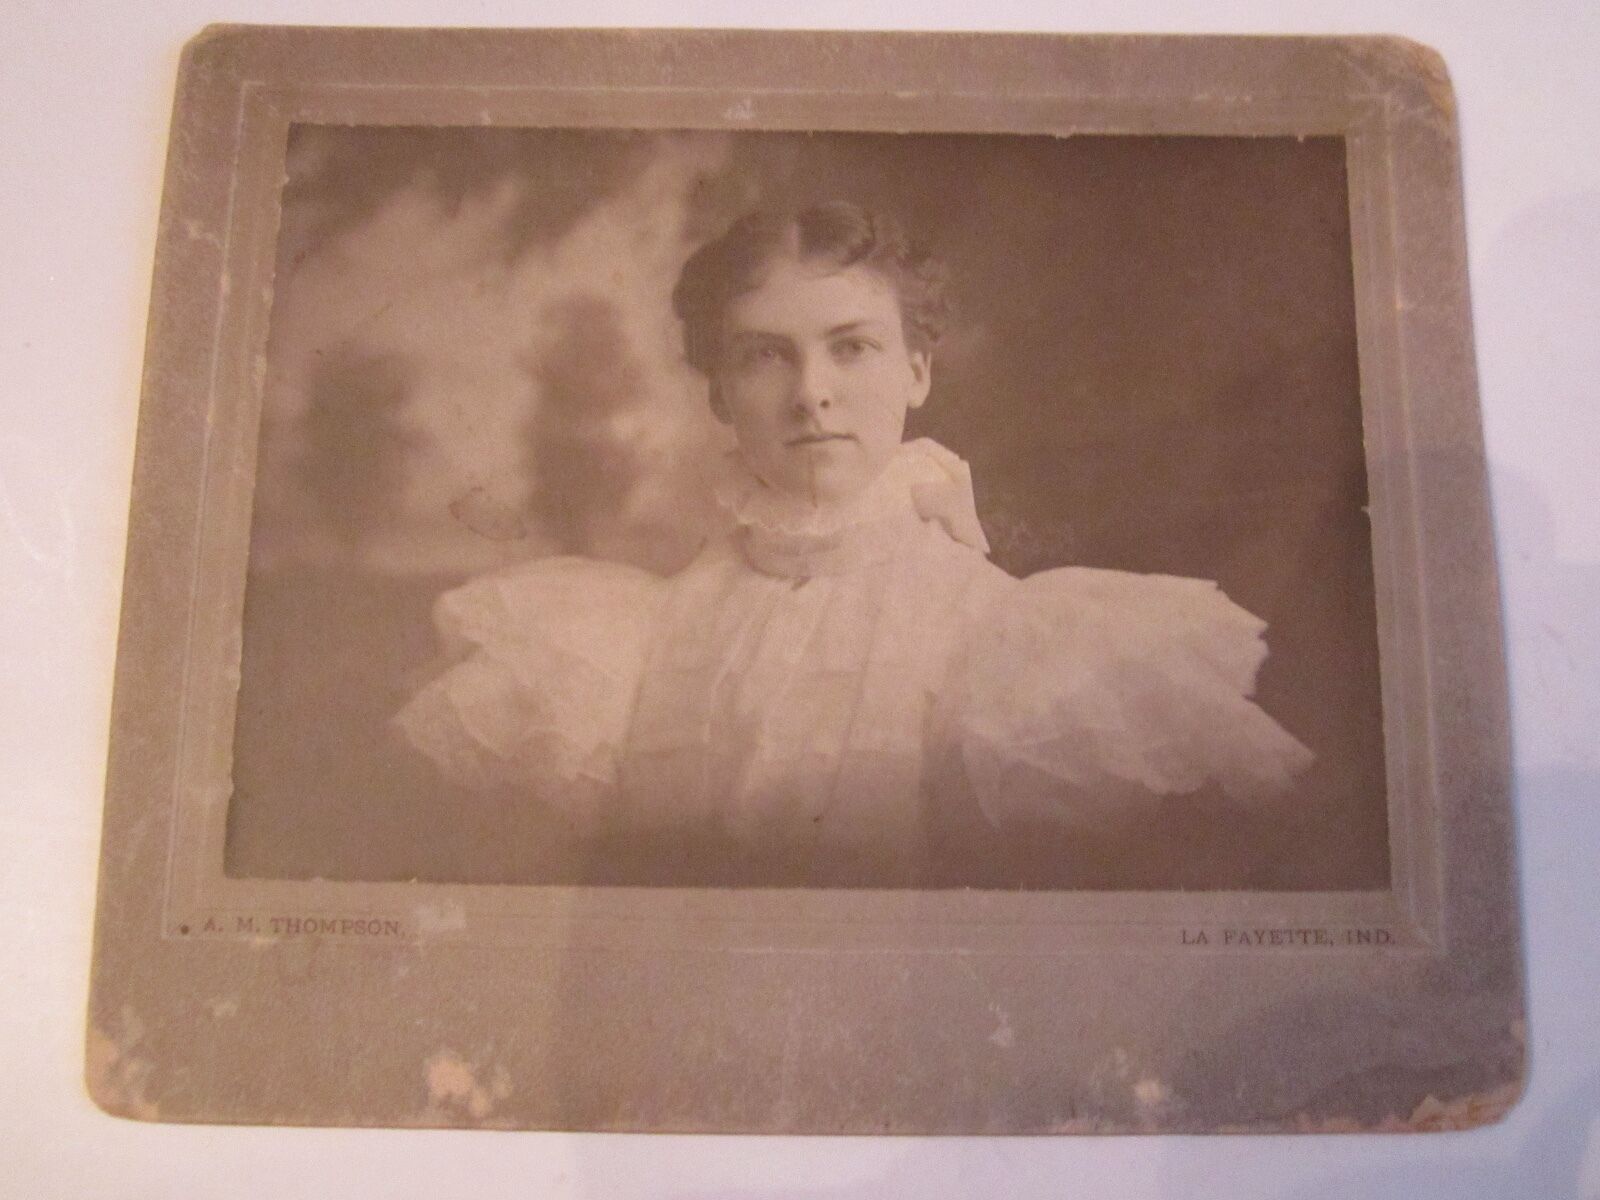 5 VINTAGE EARLY PHOTOGRAPHS - SEE PICS - PORTRAITS - TUB OFCC